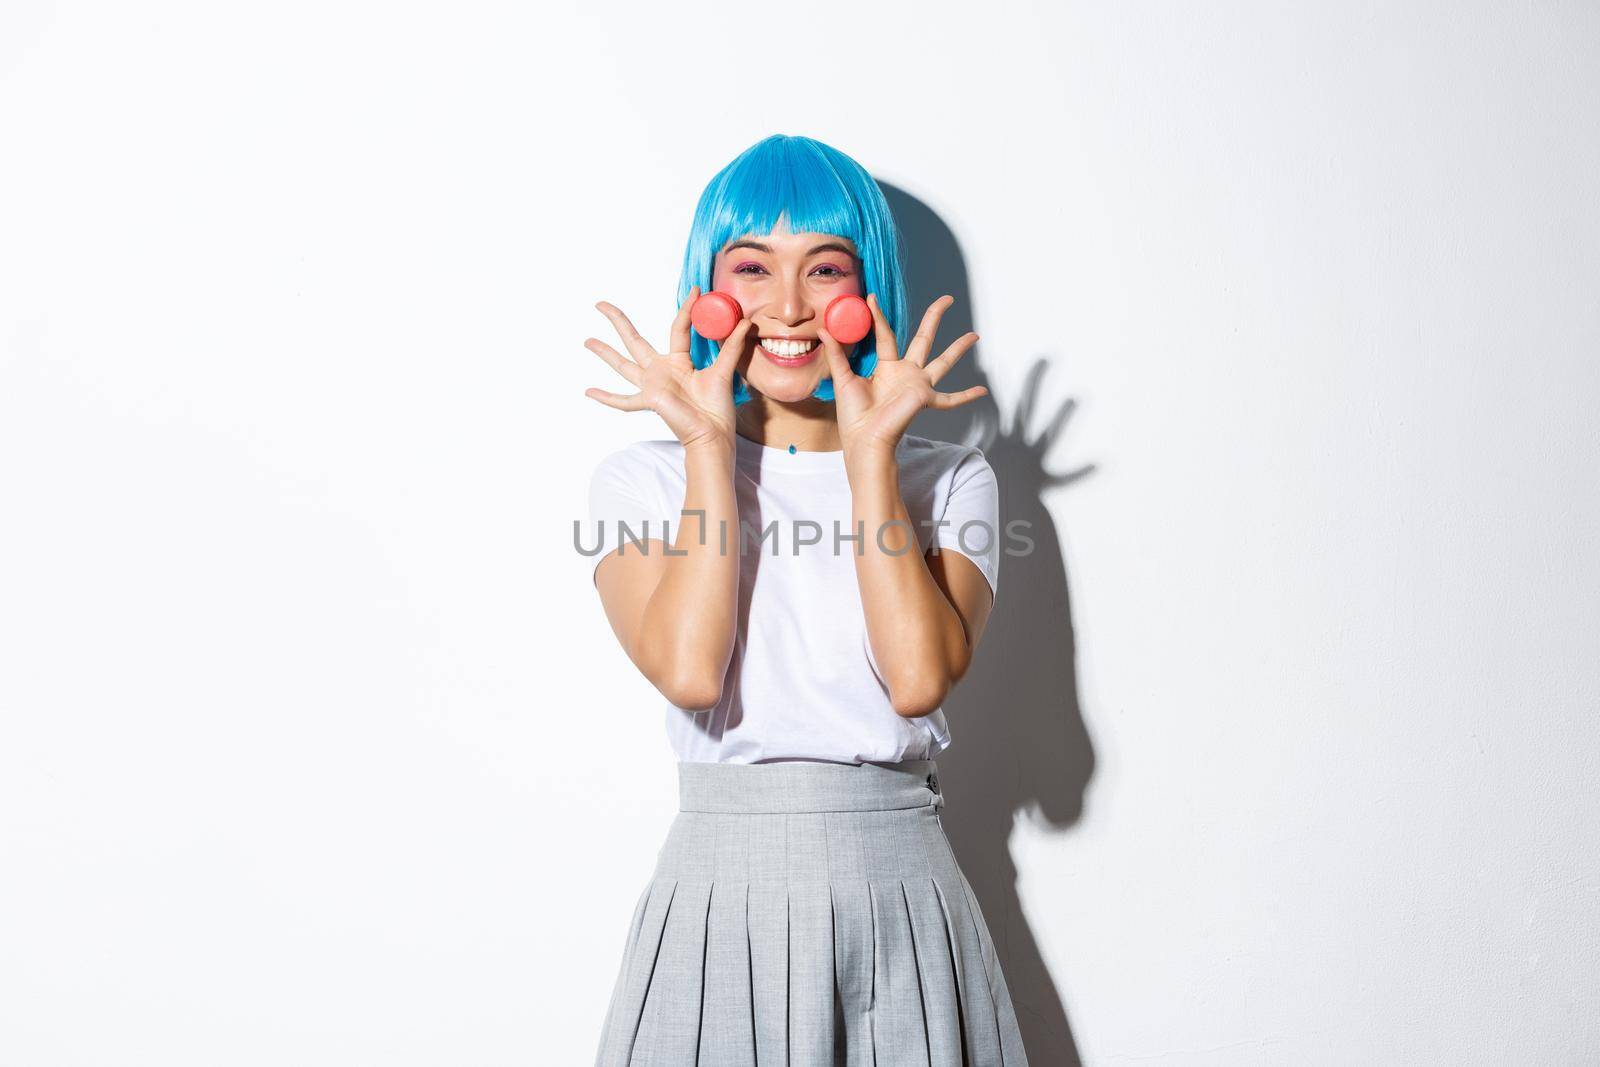 Image of beautiful smiling asian girl looking silly, showing macaroons, wearing blue anime wig, standing over white background.